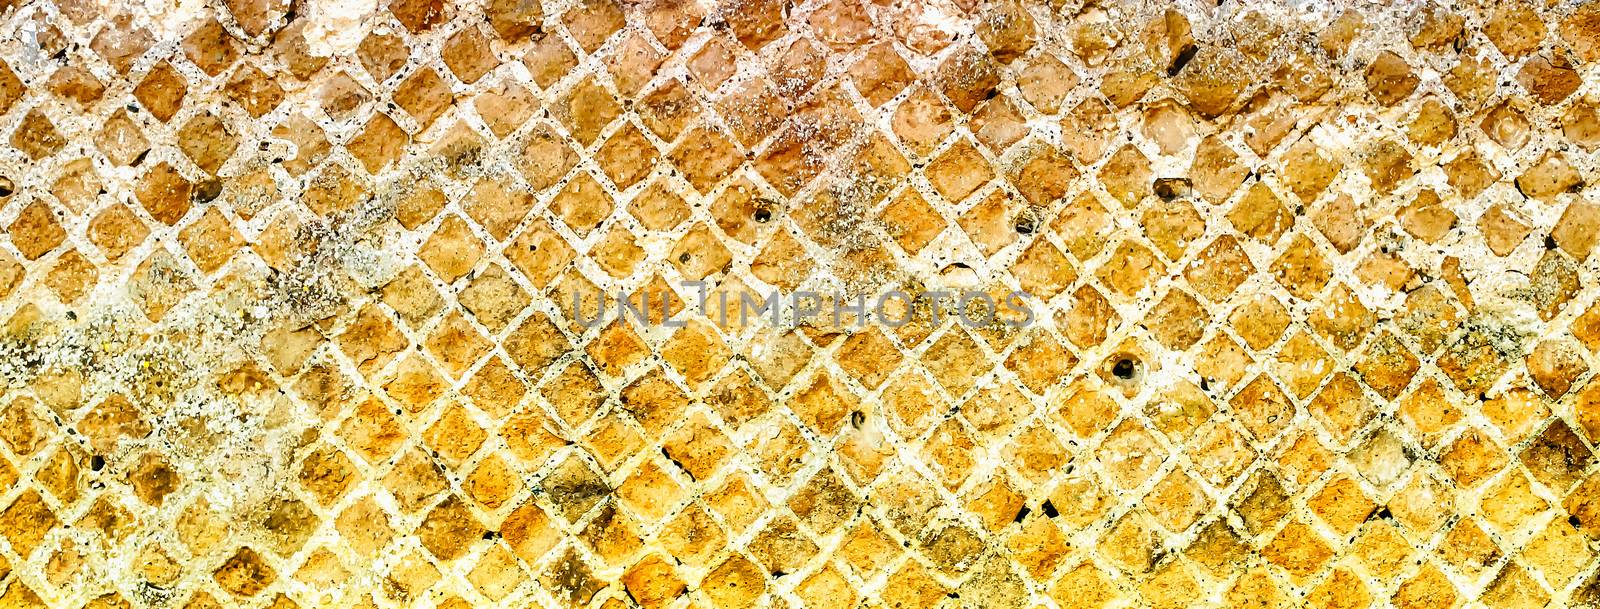 Stone Brick Wall Texture with copy space, may use as background